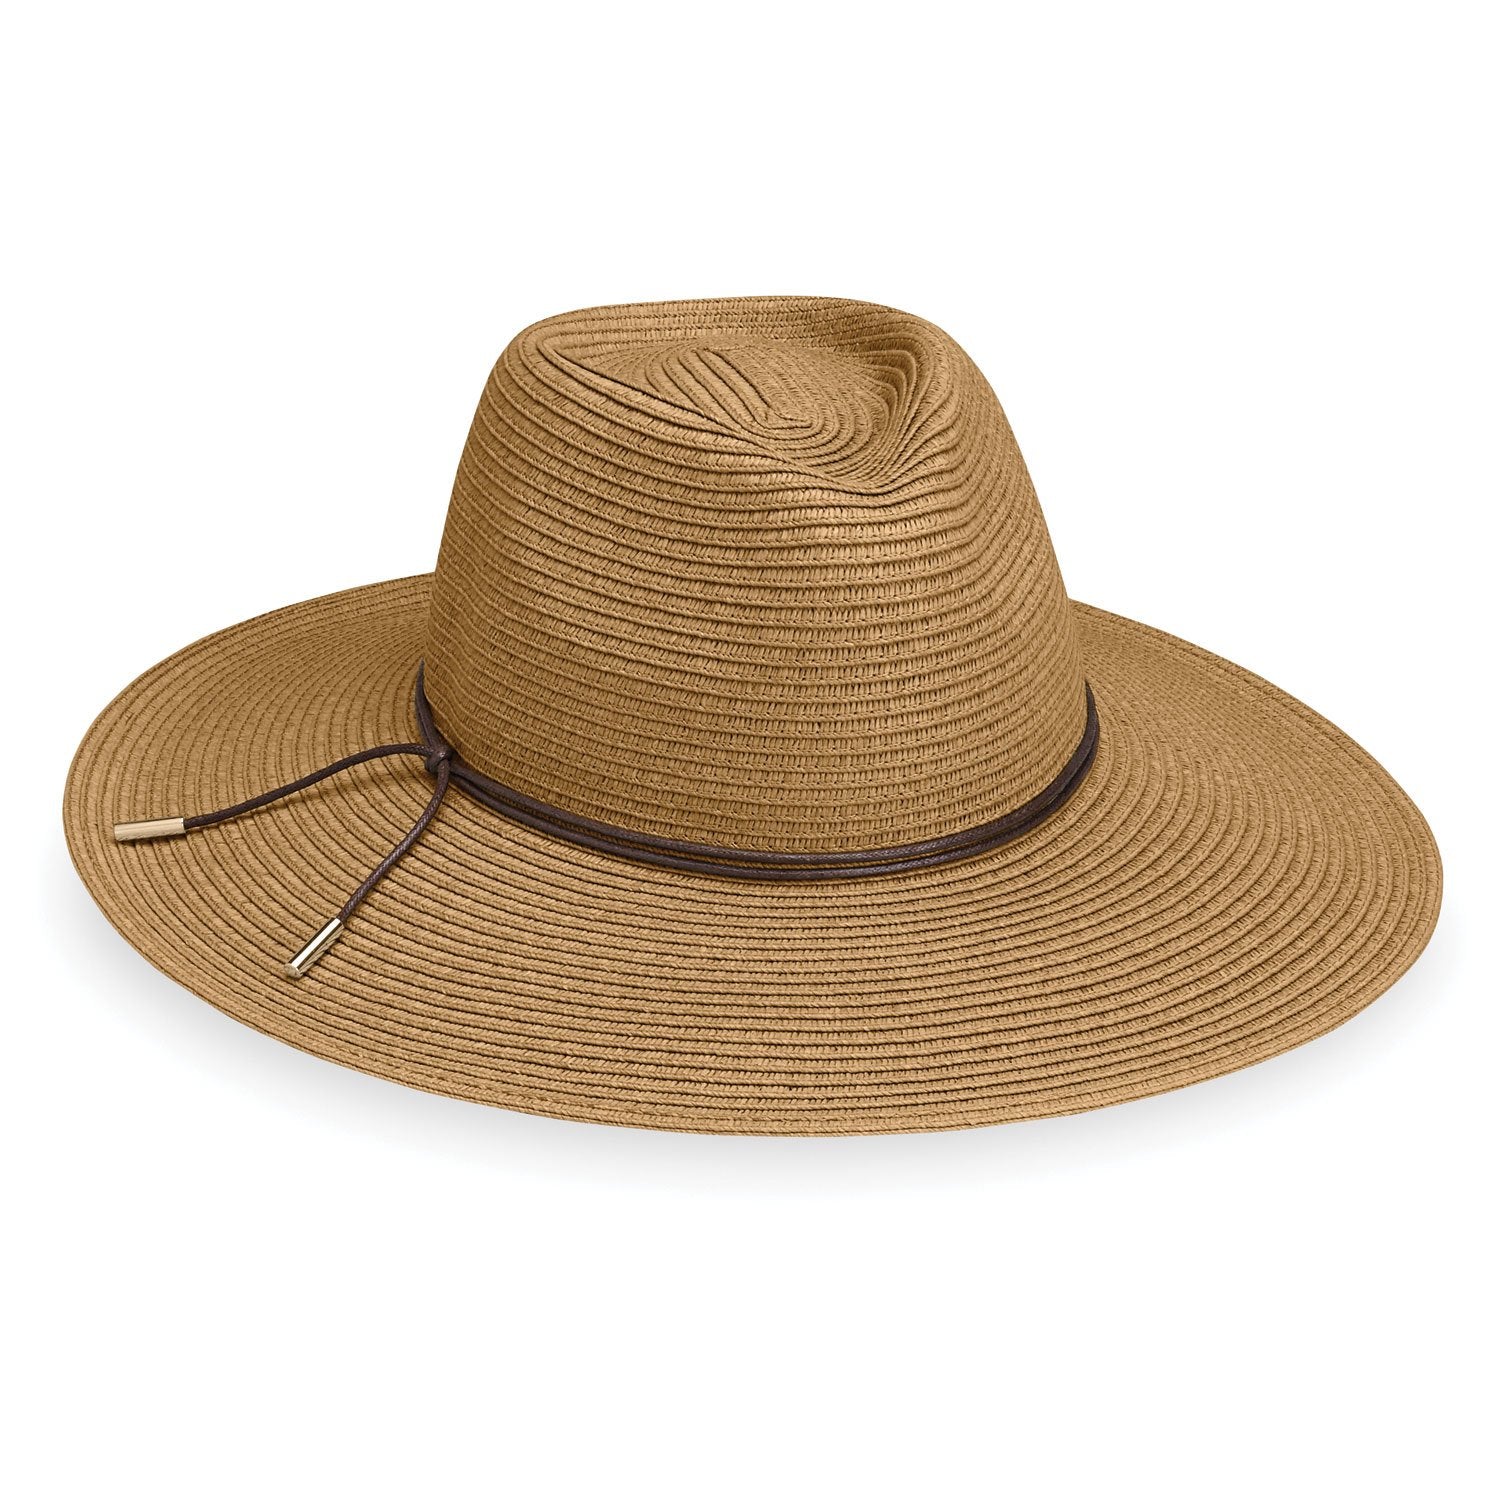 Featuring Front of Ladies' Packable Wide Brim Fedora Style Montecito Summer Sun Hat from Wallaroo